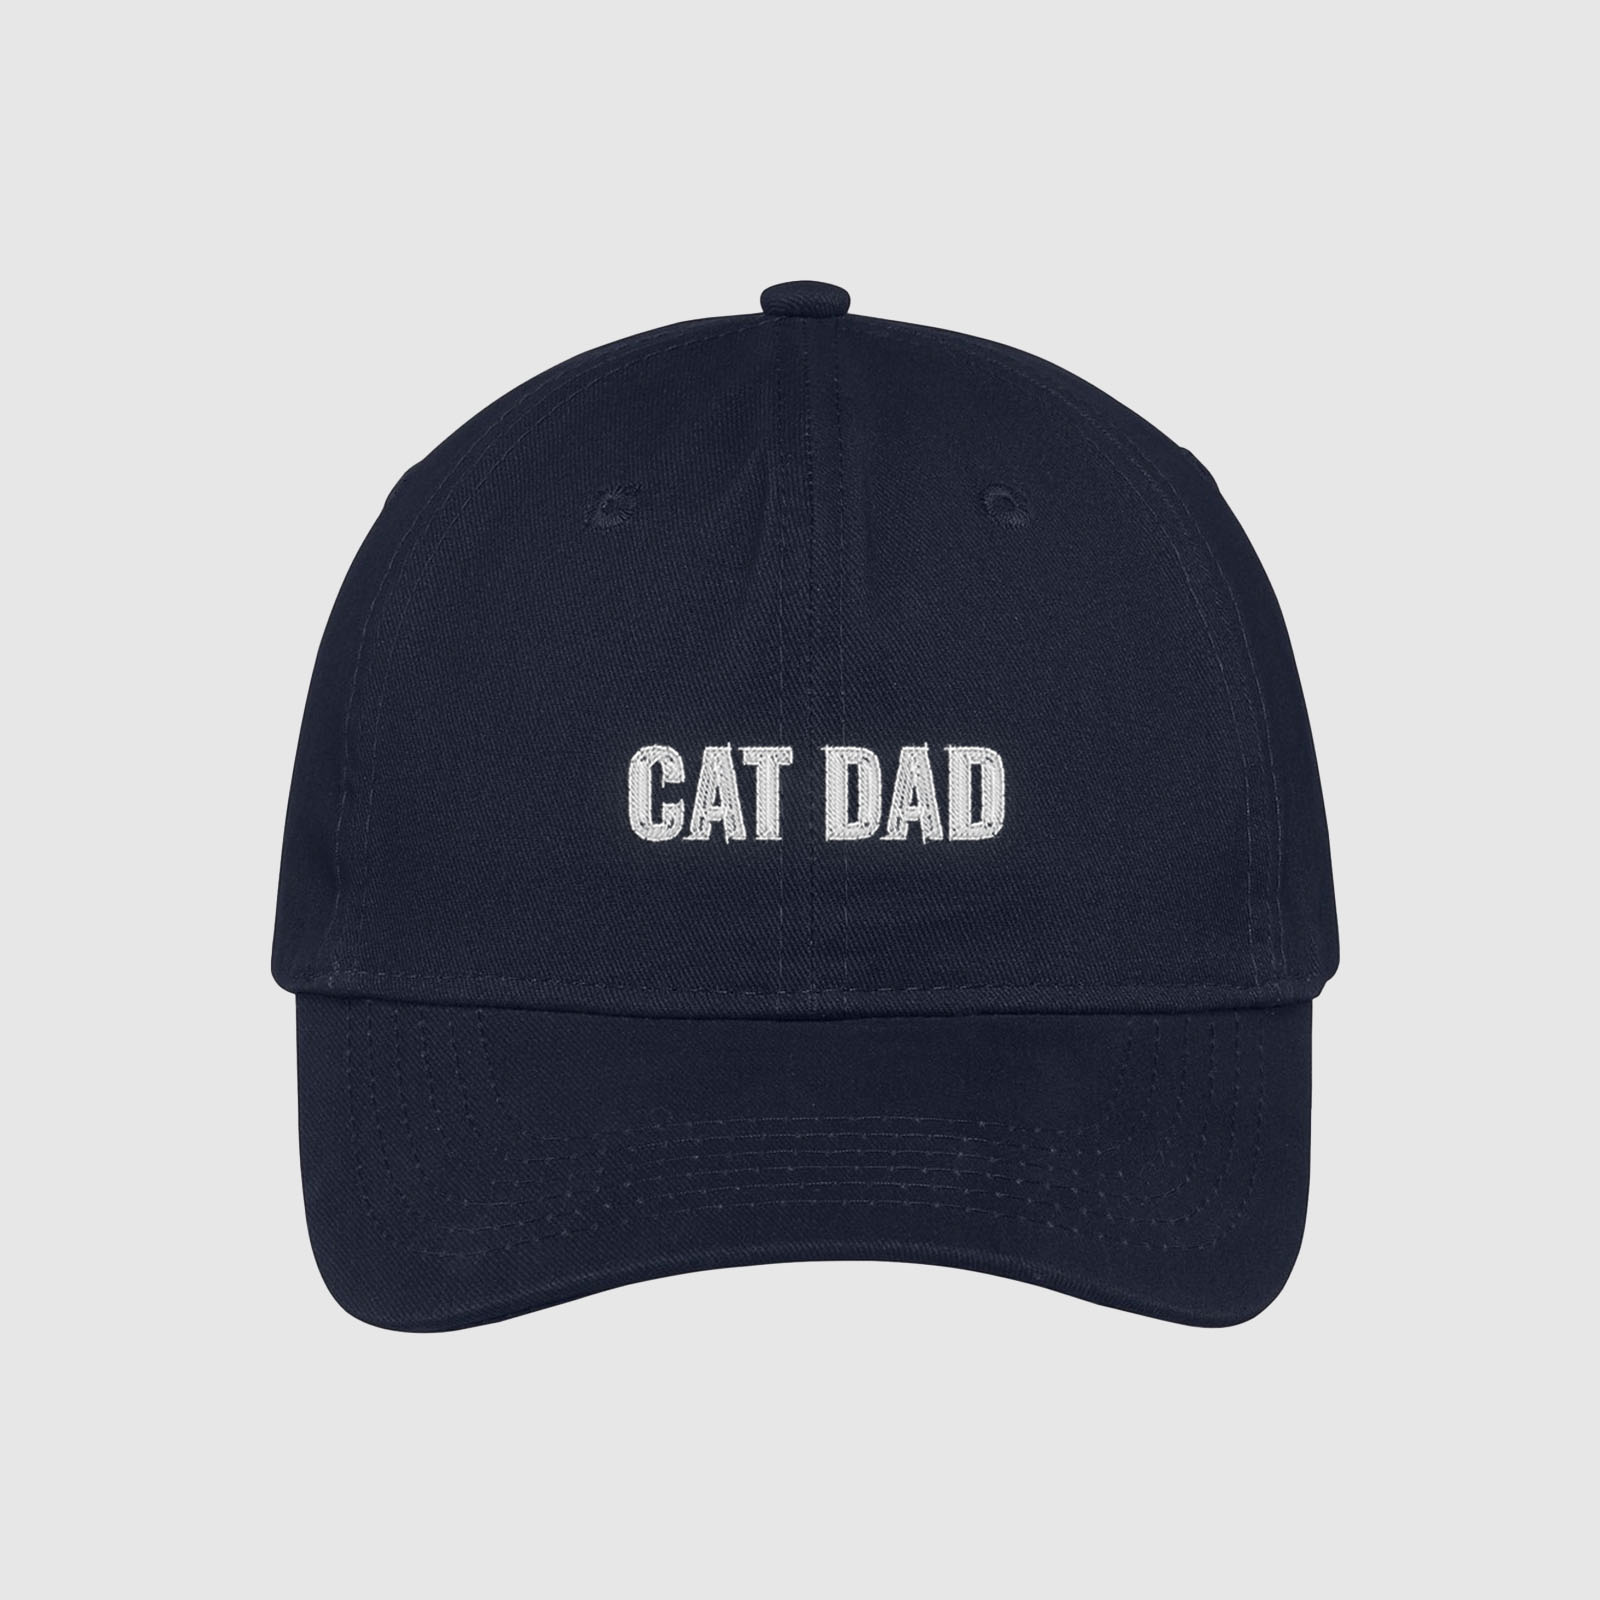 navy cat dad hat embroidered with white text